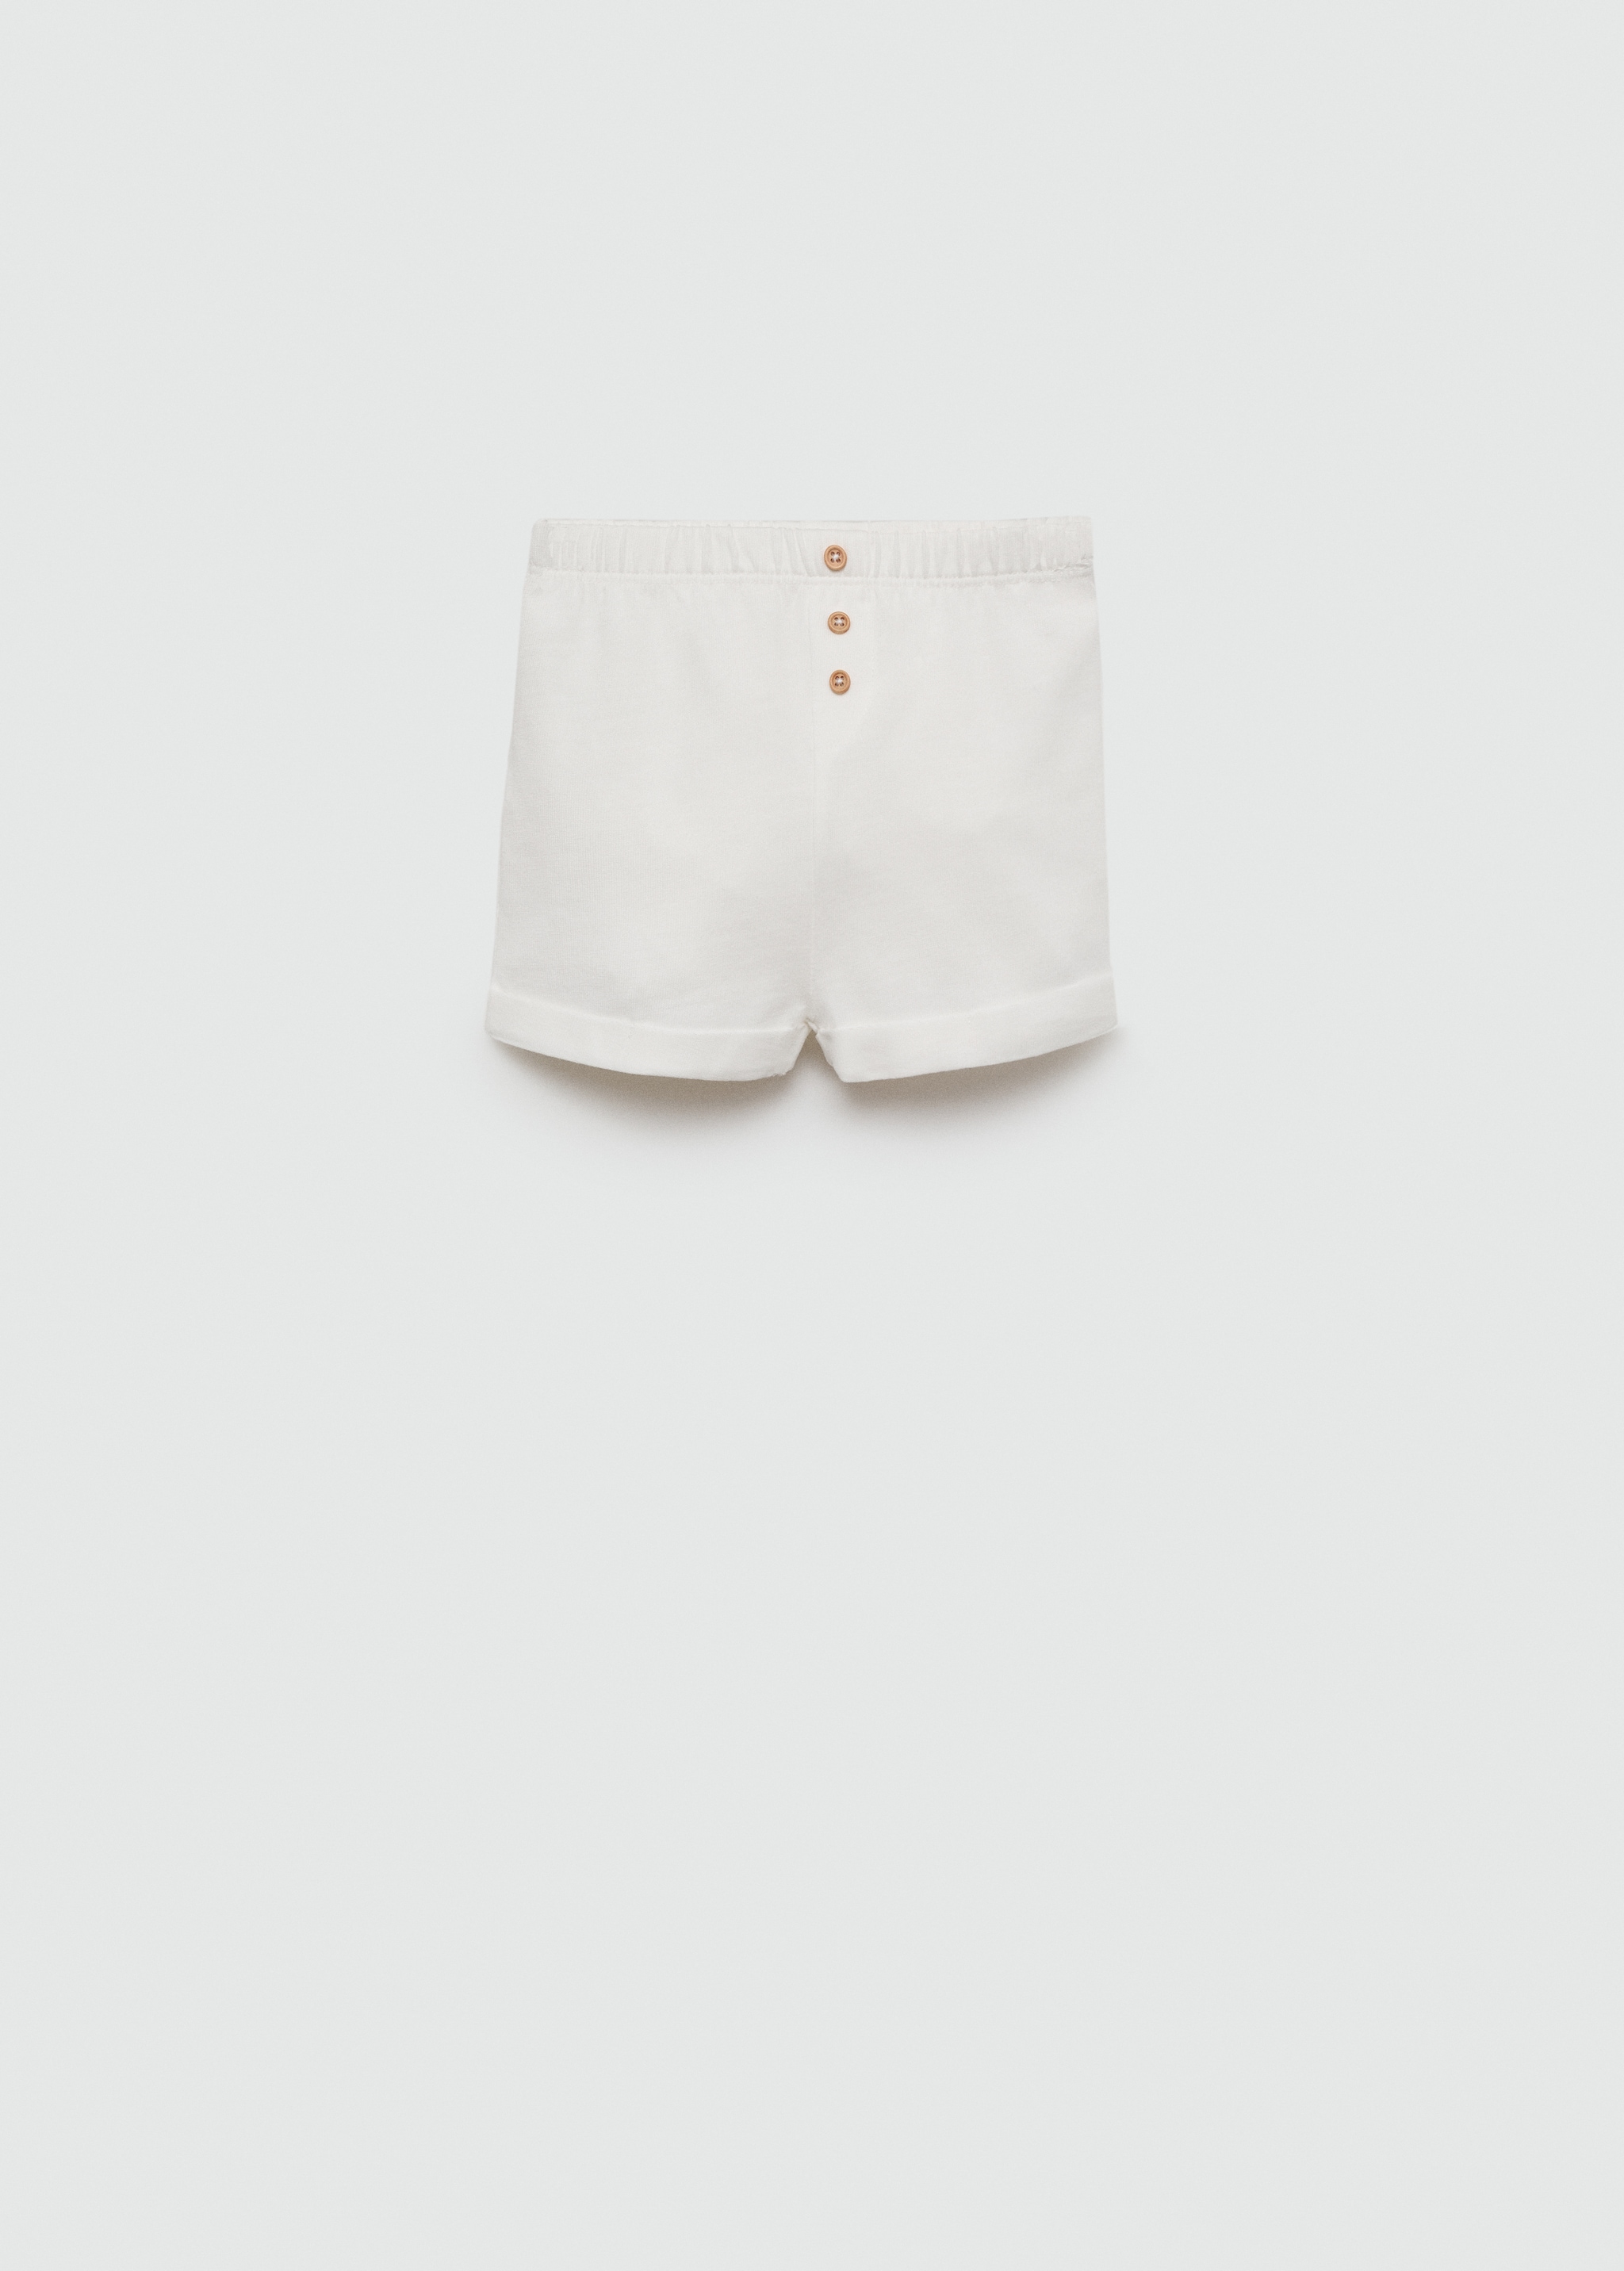 Buttoned cotton shorts - Article without model